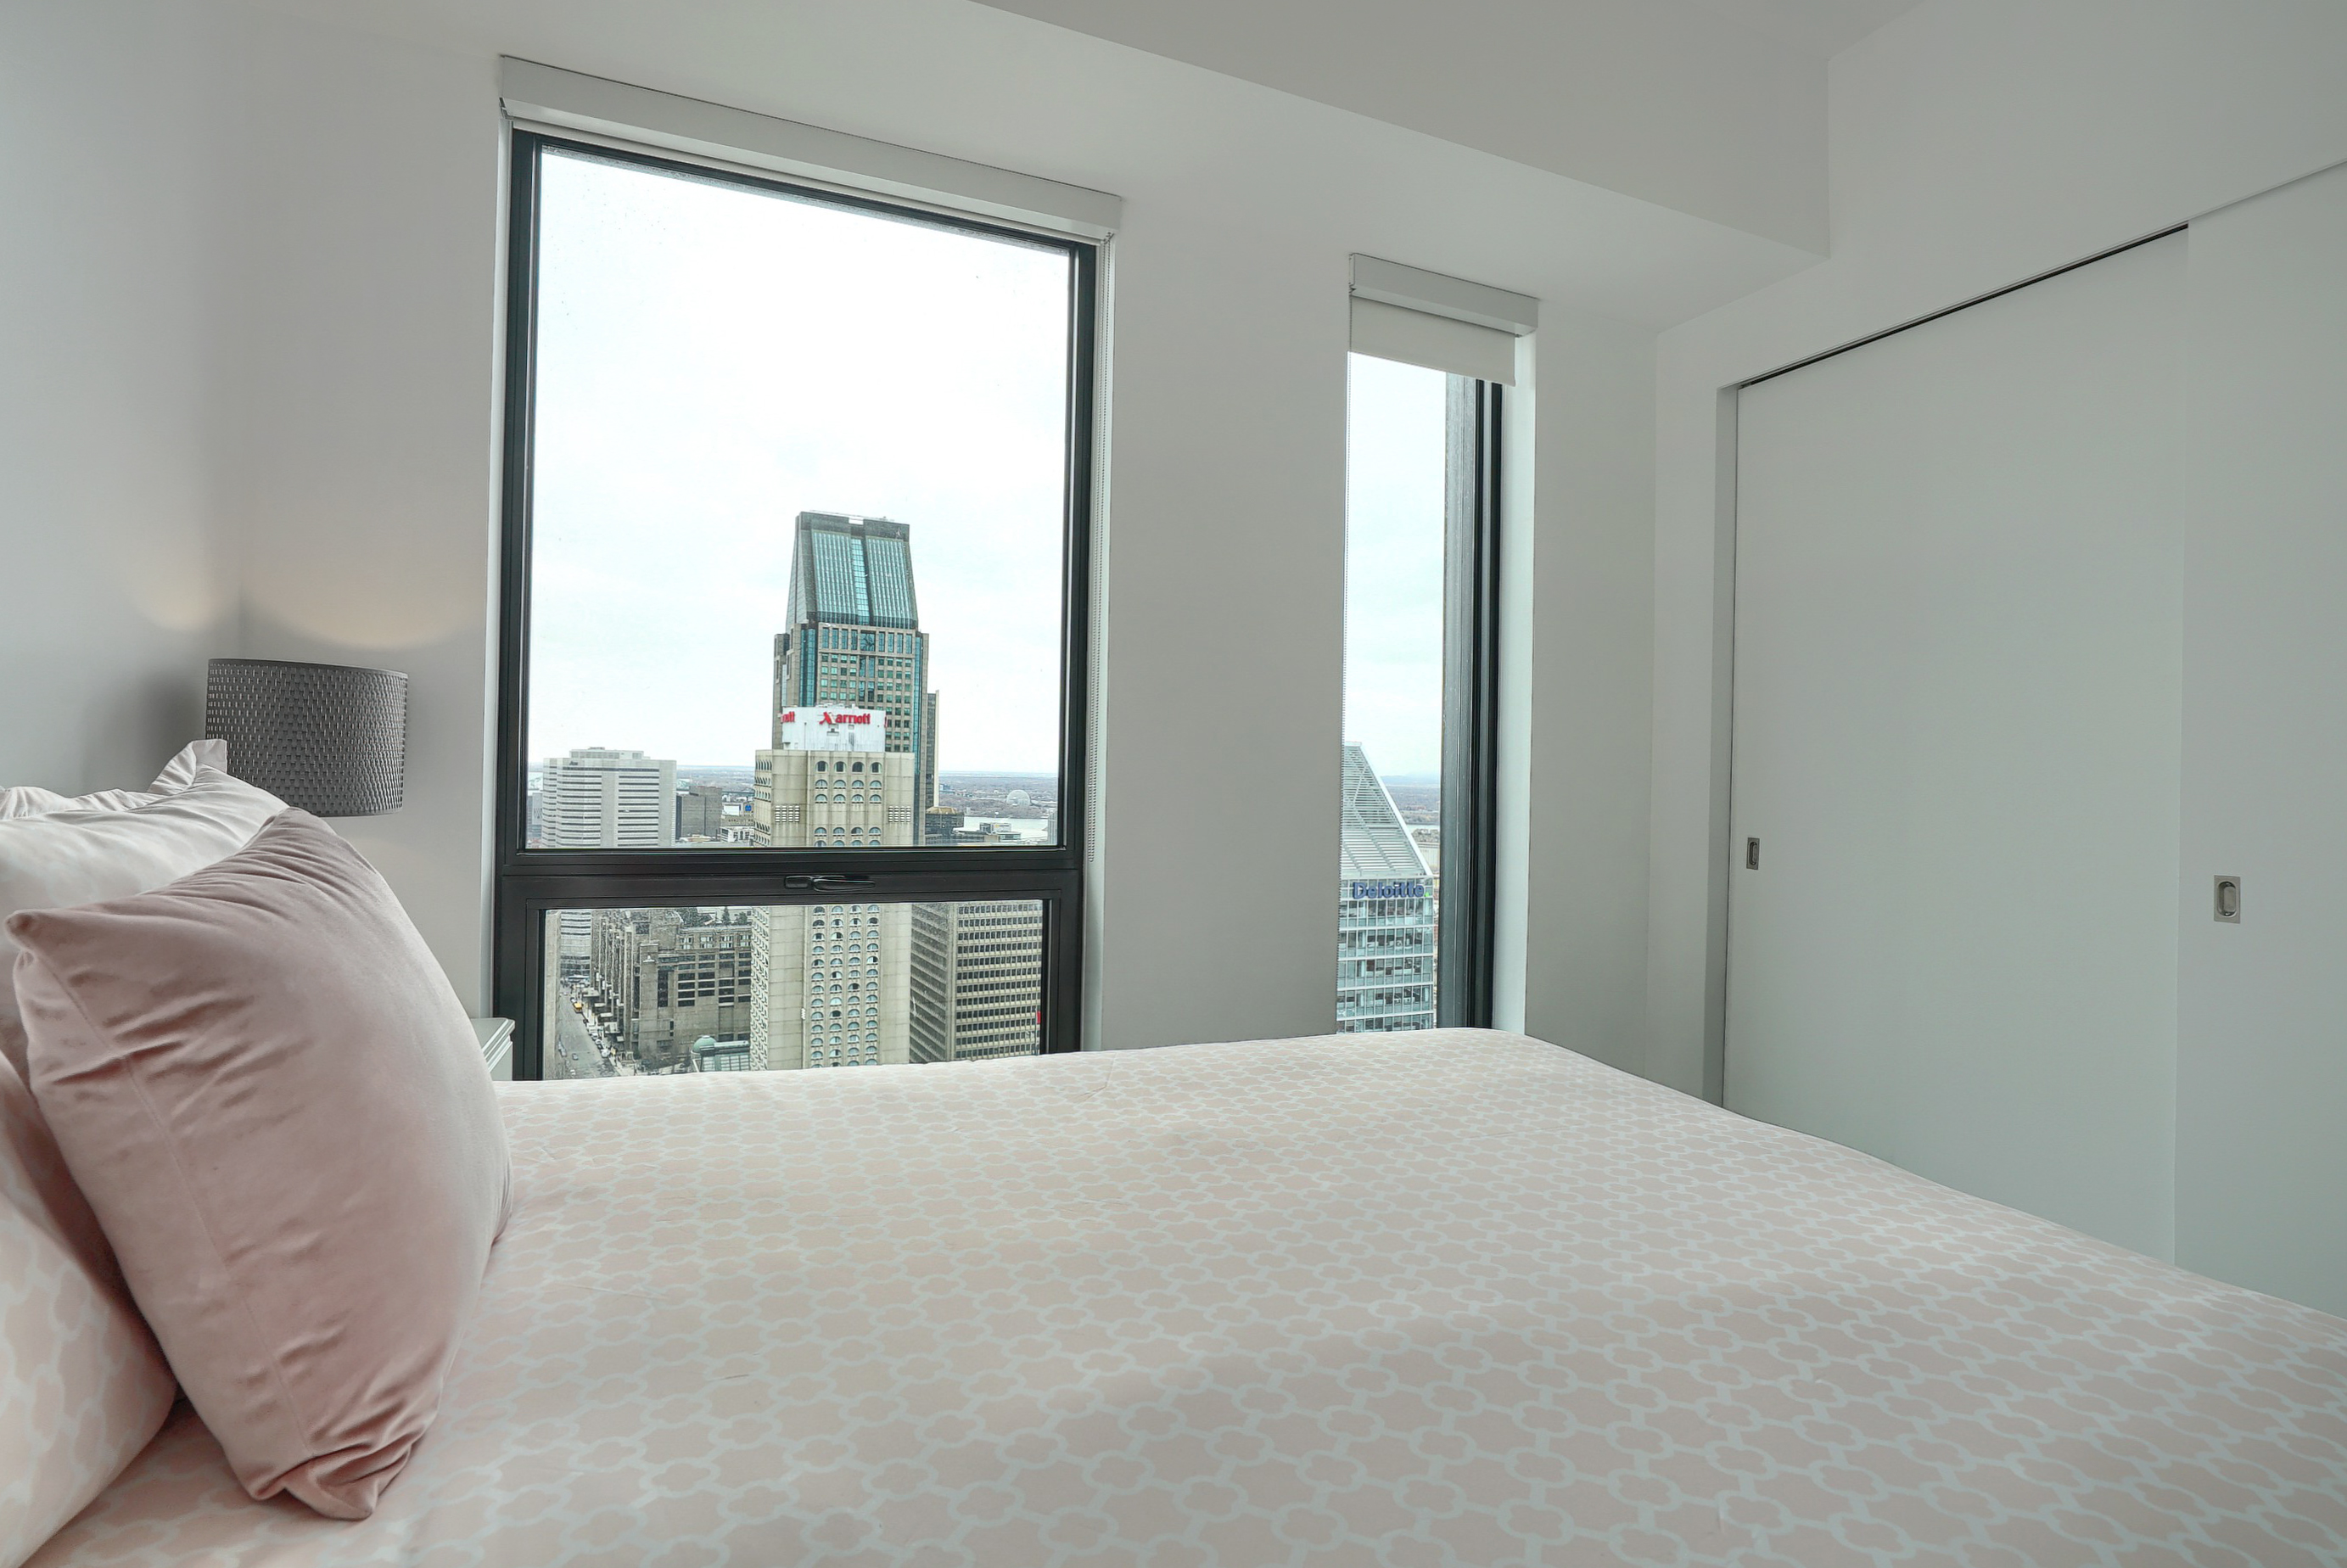 Second bedroom showing the plush light pink and white bedding with designer pillow accents. Large walk in closet with sliding doors and two floor-to-ceiling windows for plenty of light in this furnished corporate housing apartment in montreal